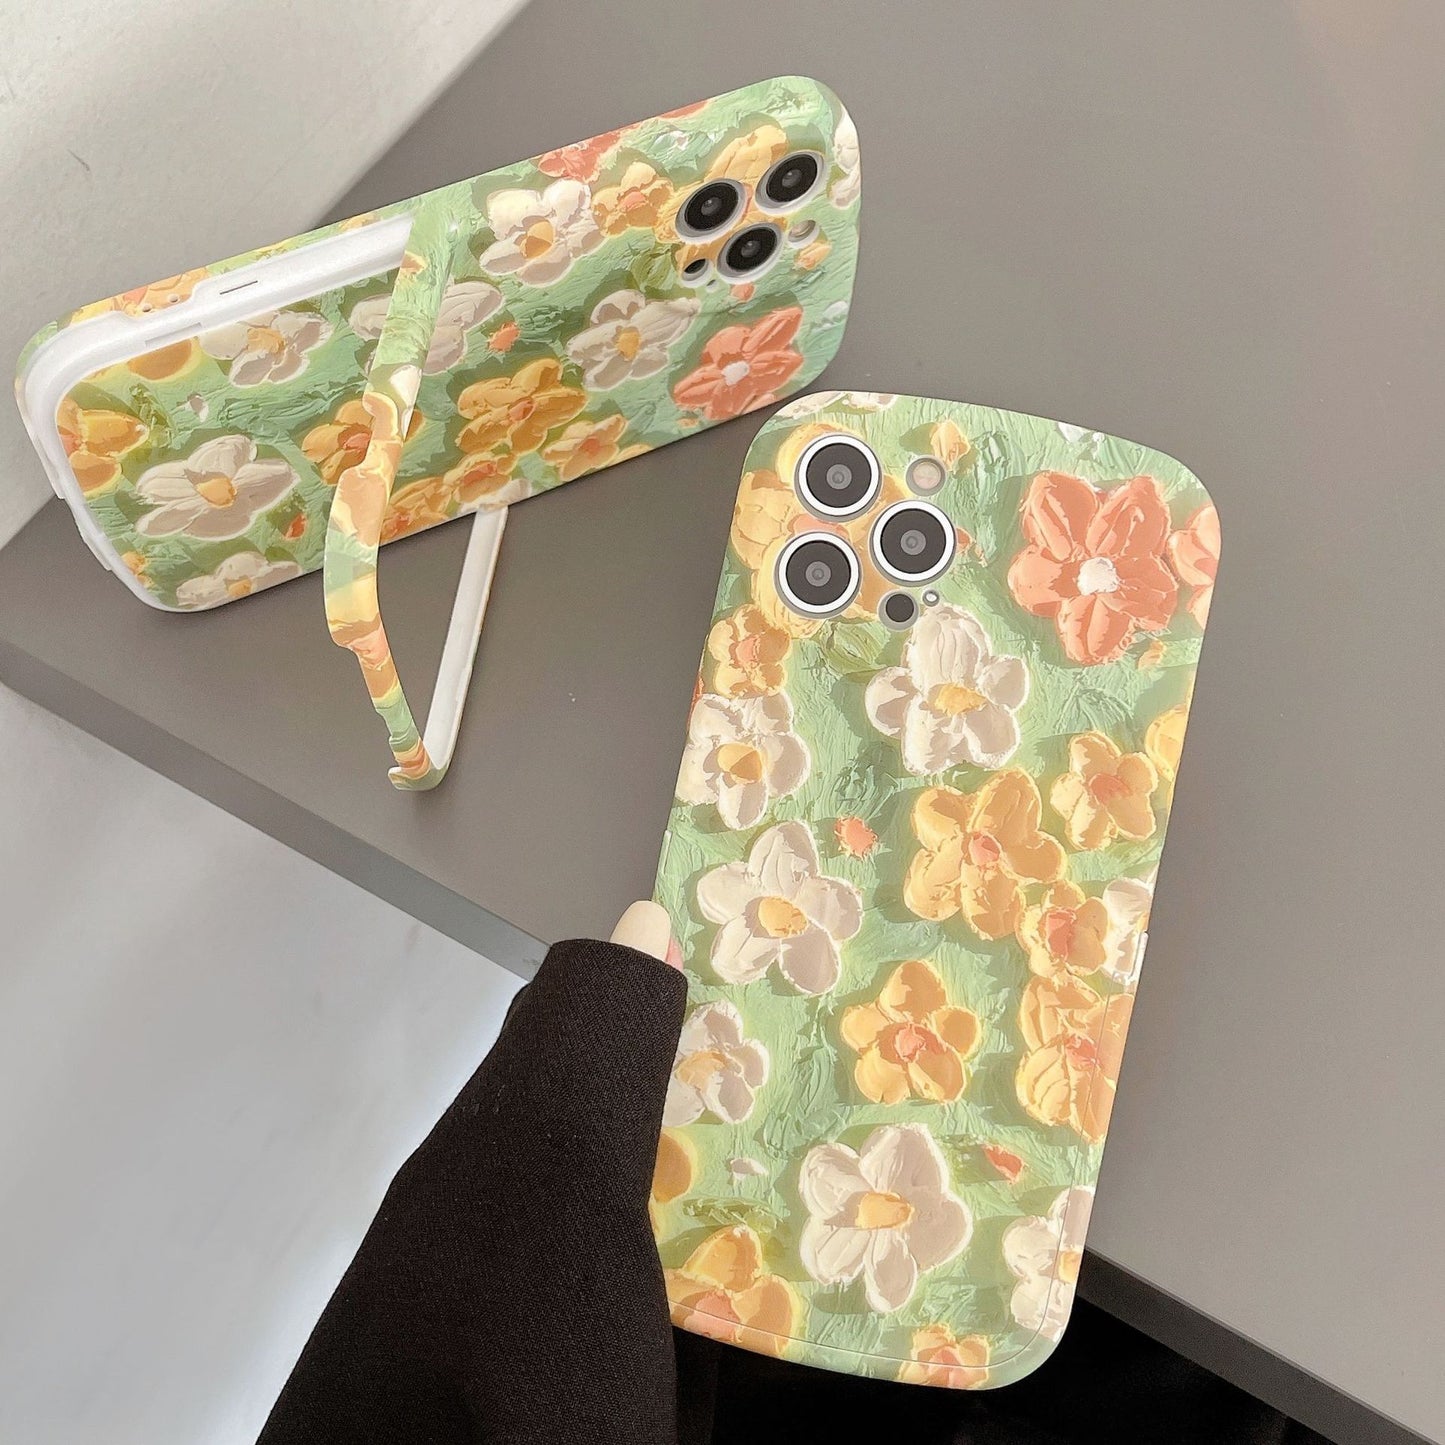 3D Painting Look iPhone Protective Cover with Stand